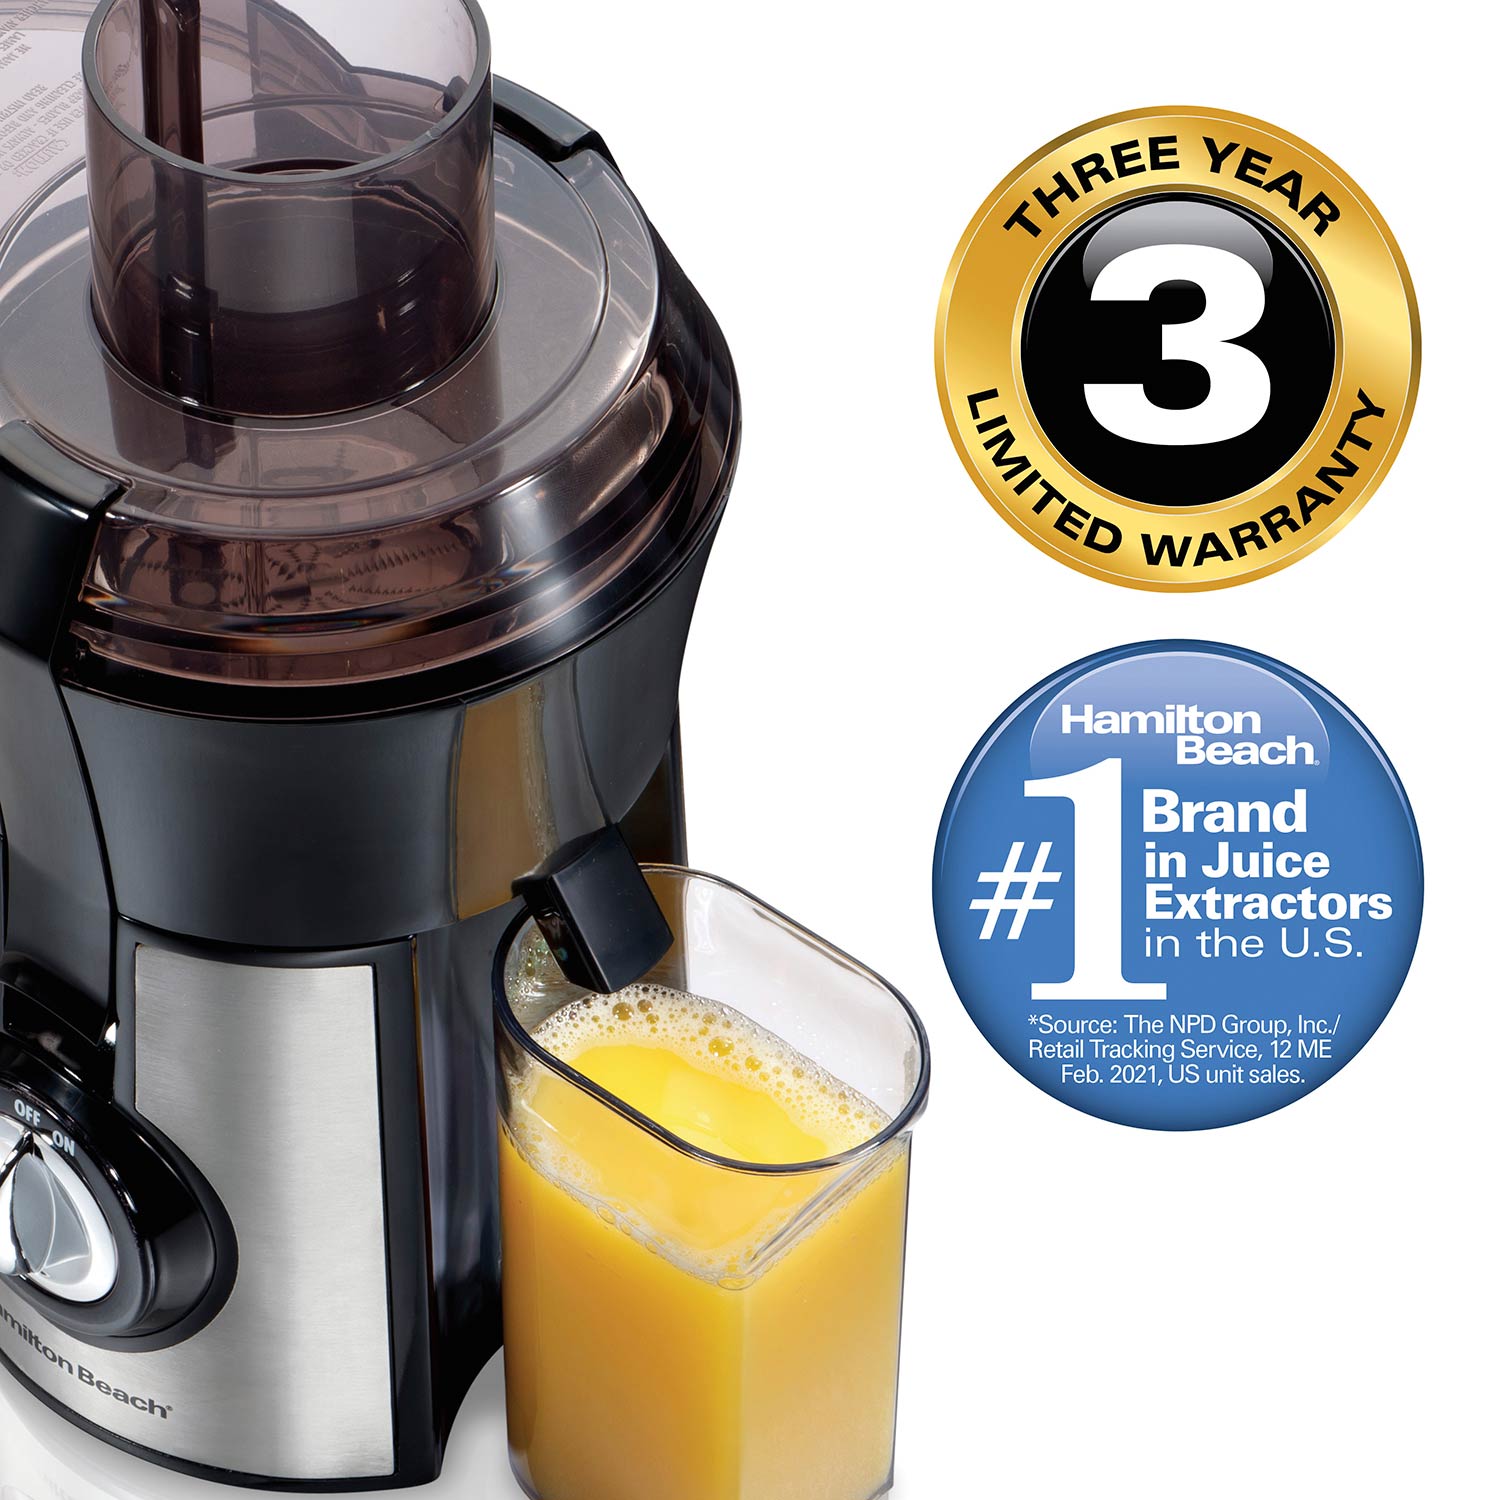 Hamilton Beach 67608 Big Mouth Juice Extractor Discontinued Stainless Steel 